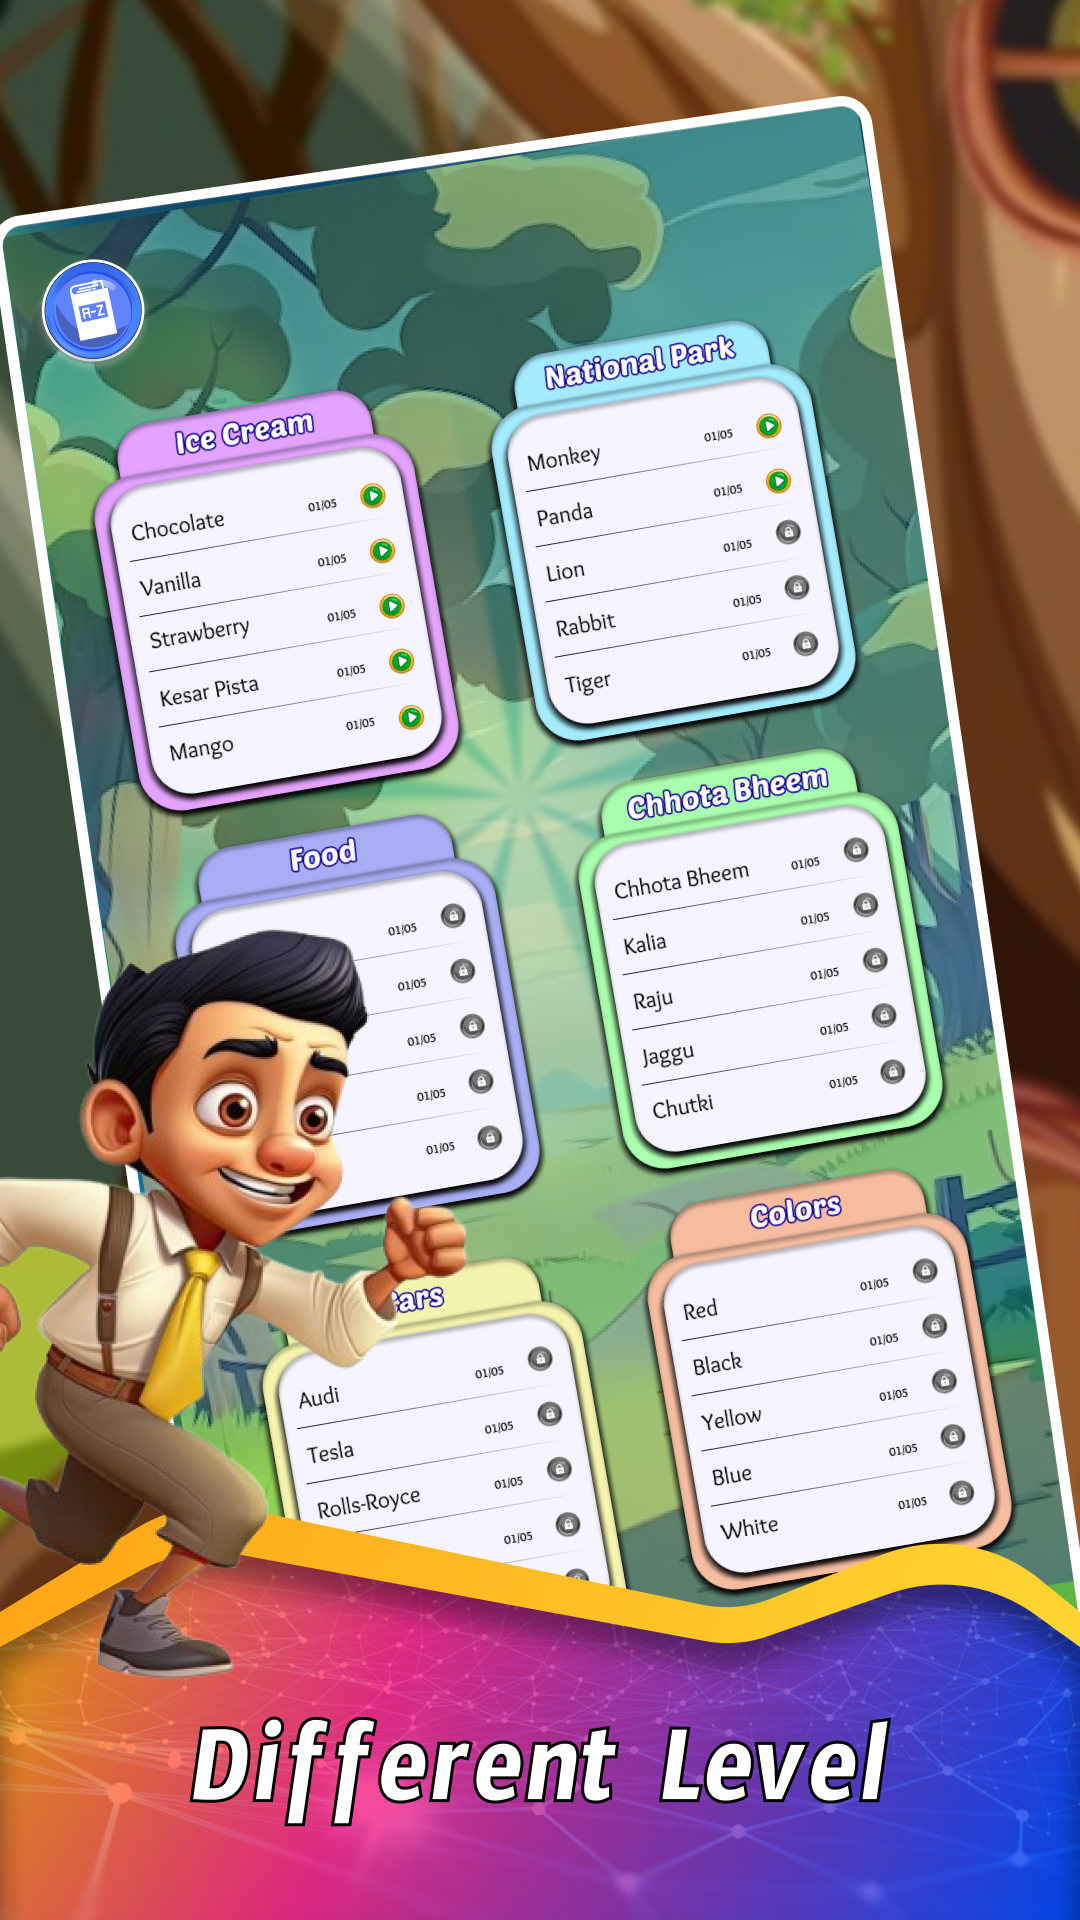 Screenshot of Word Puzzle Quest